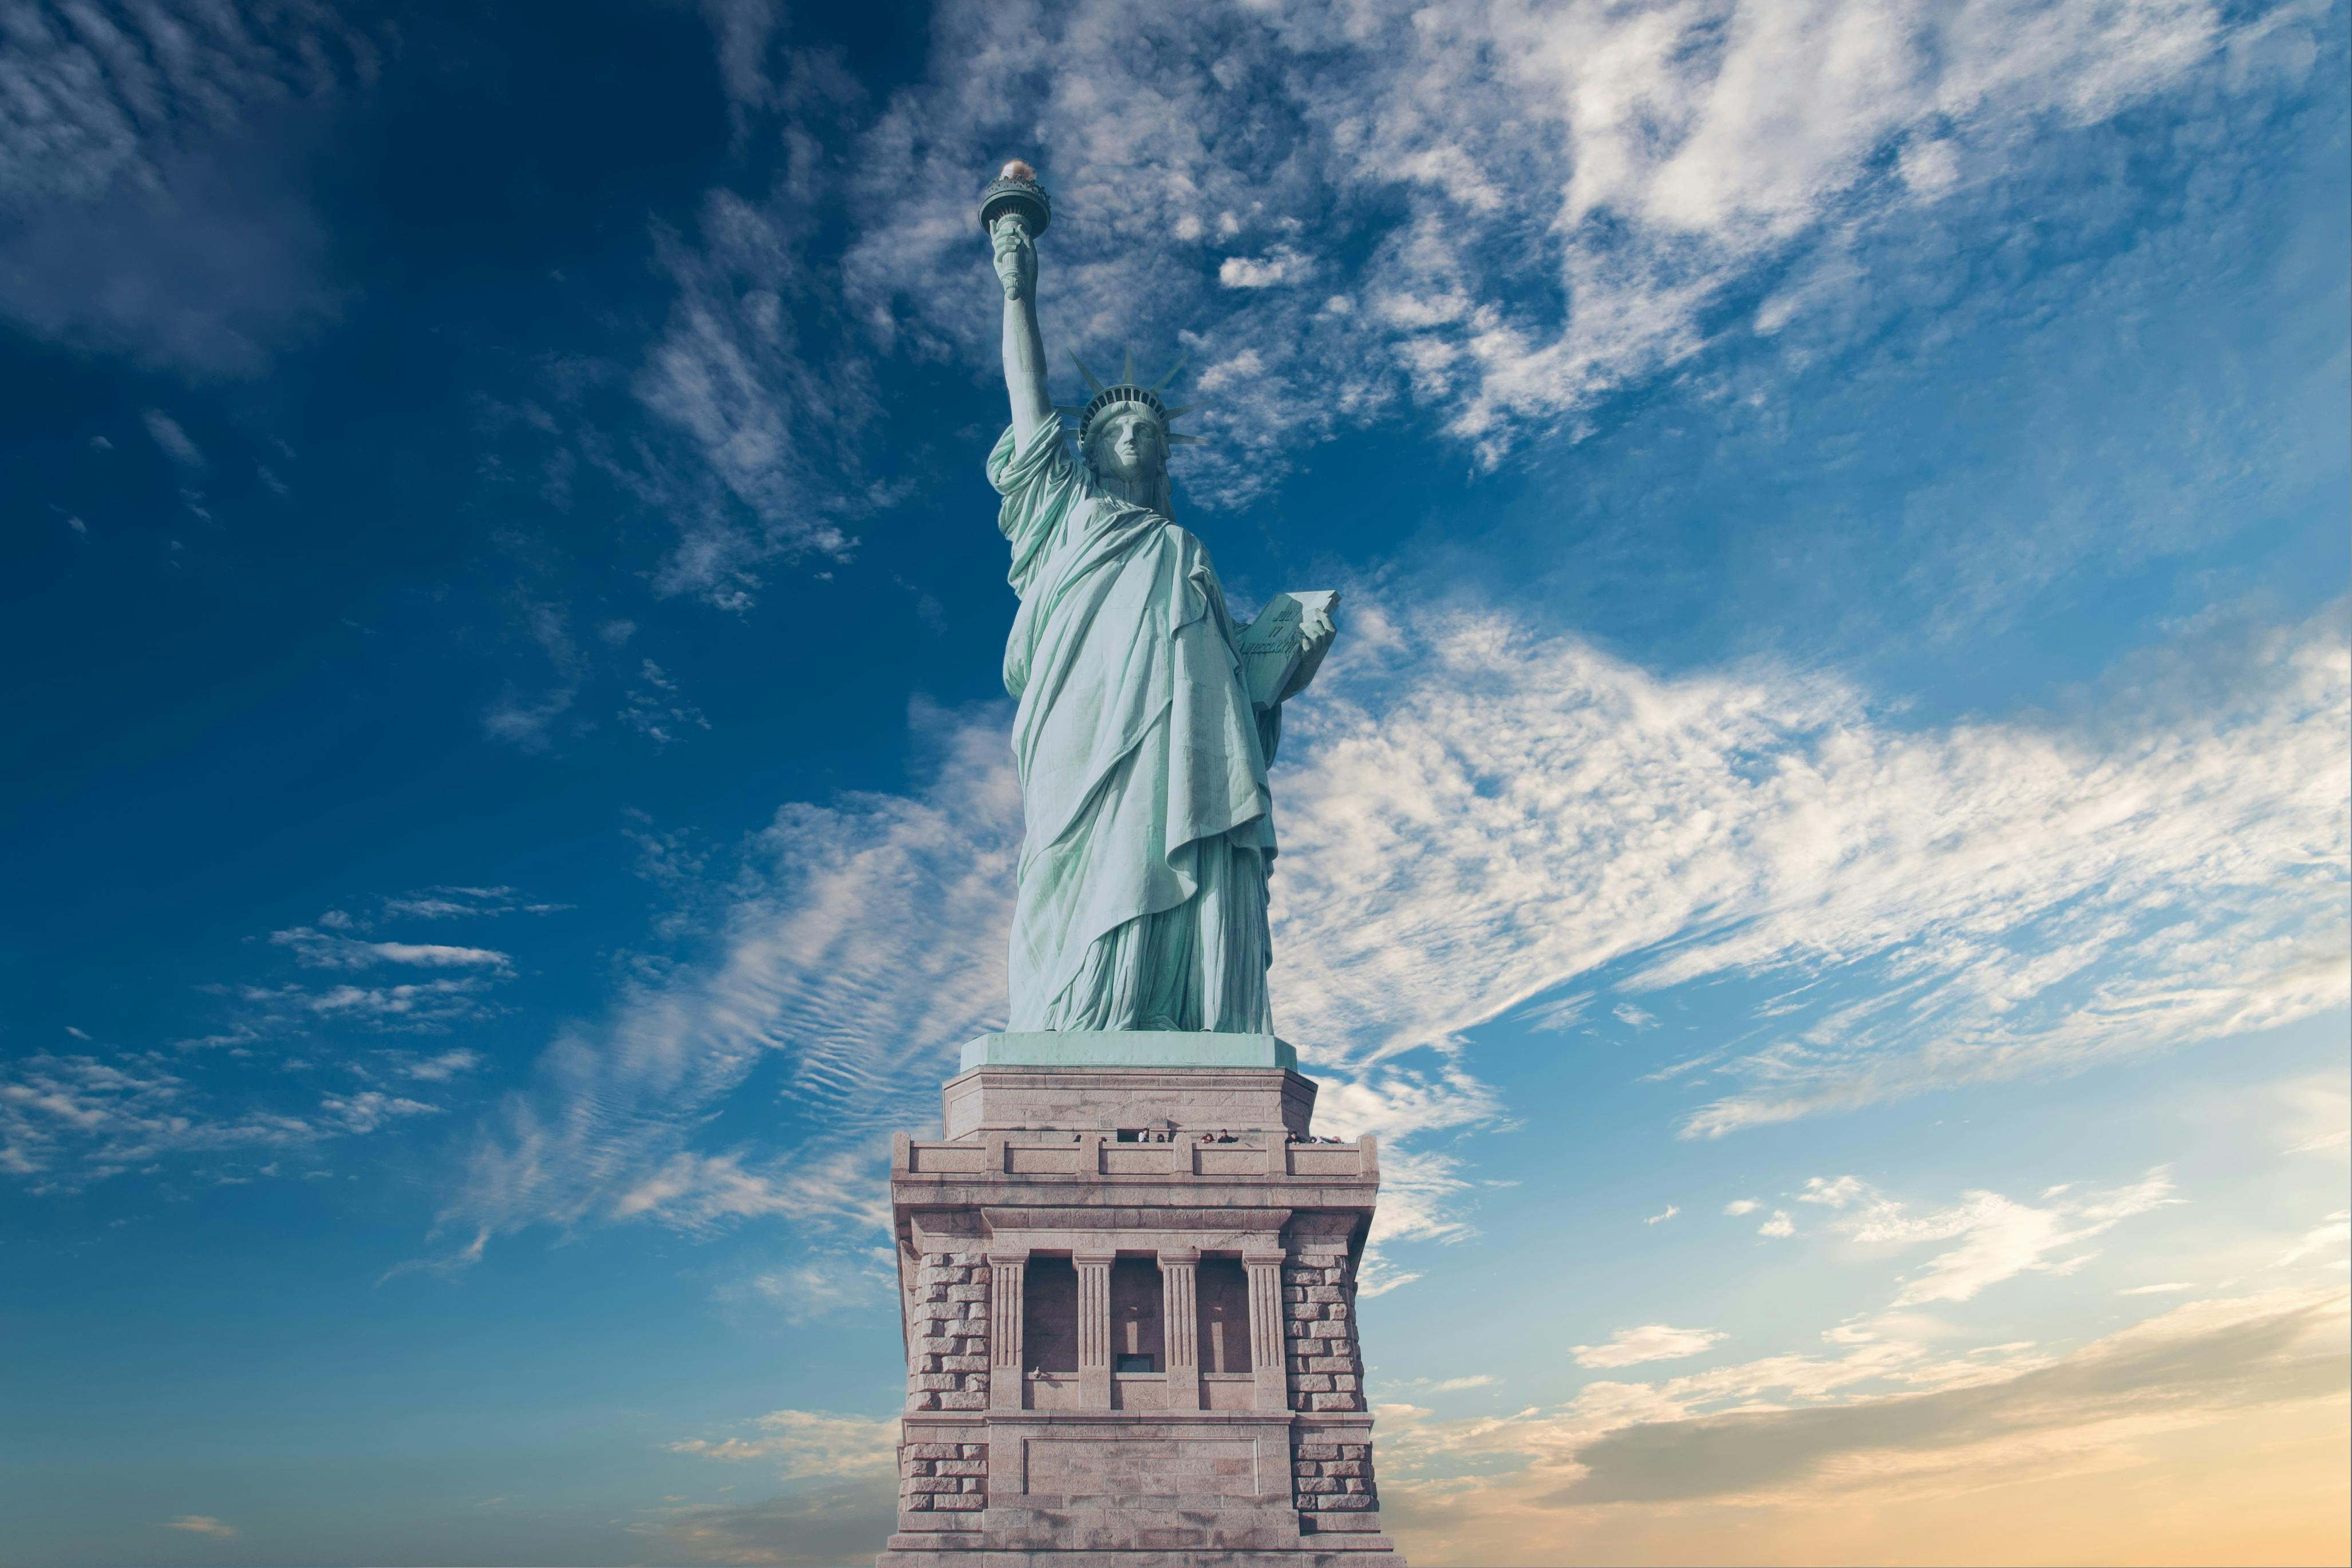 Statue of Liberty Wallpaper  iPhone Android  Desktop Backgrounds  New  york wallpaper Liberty wallpaper New york statue